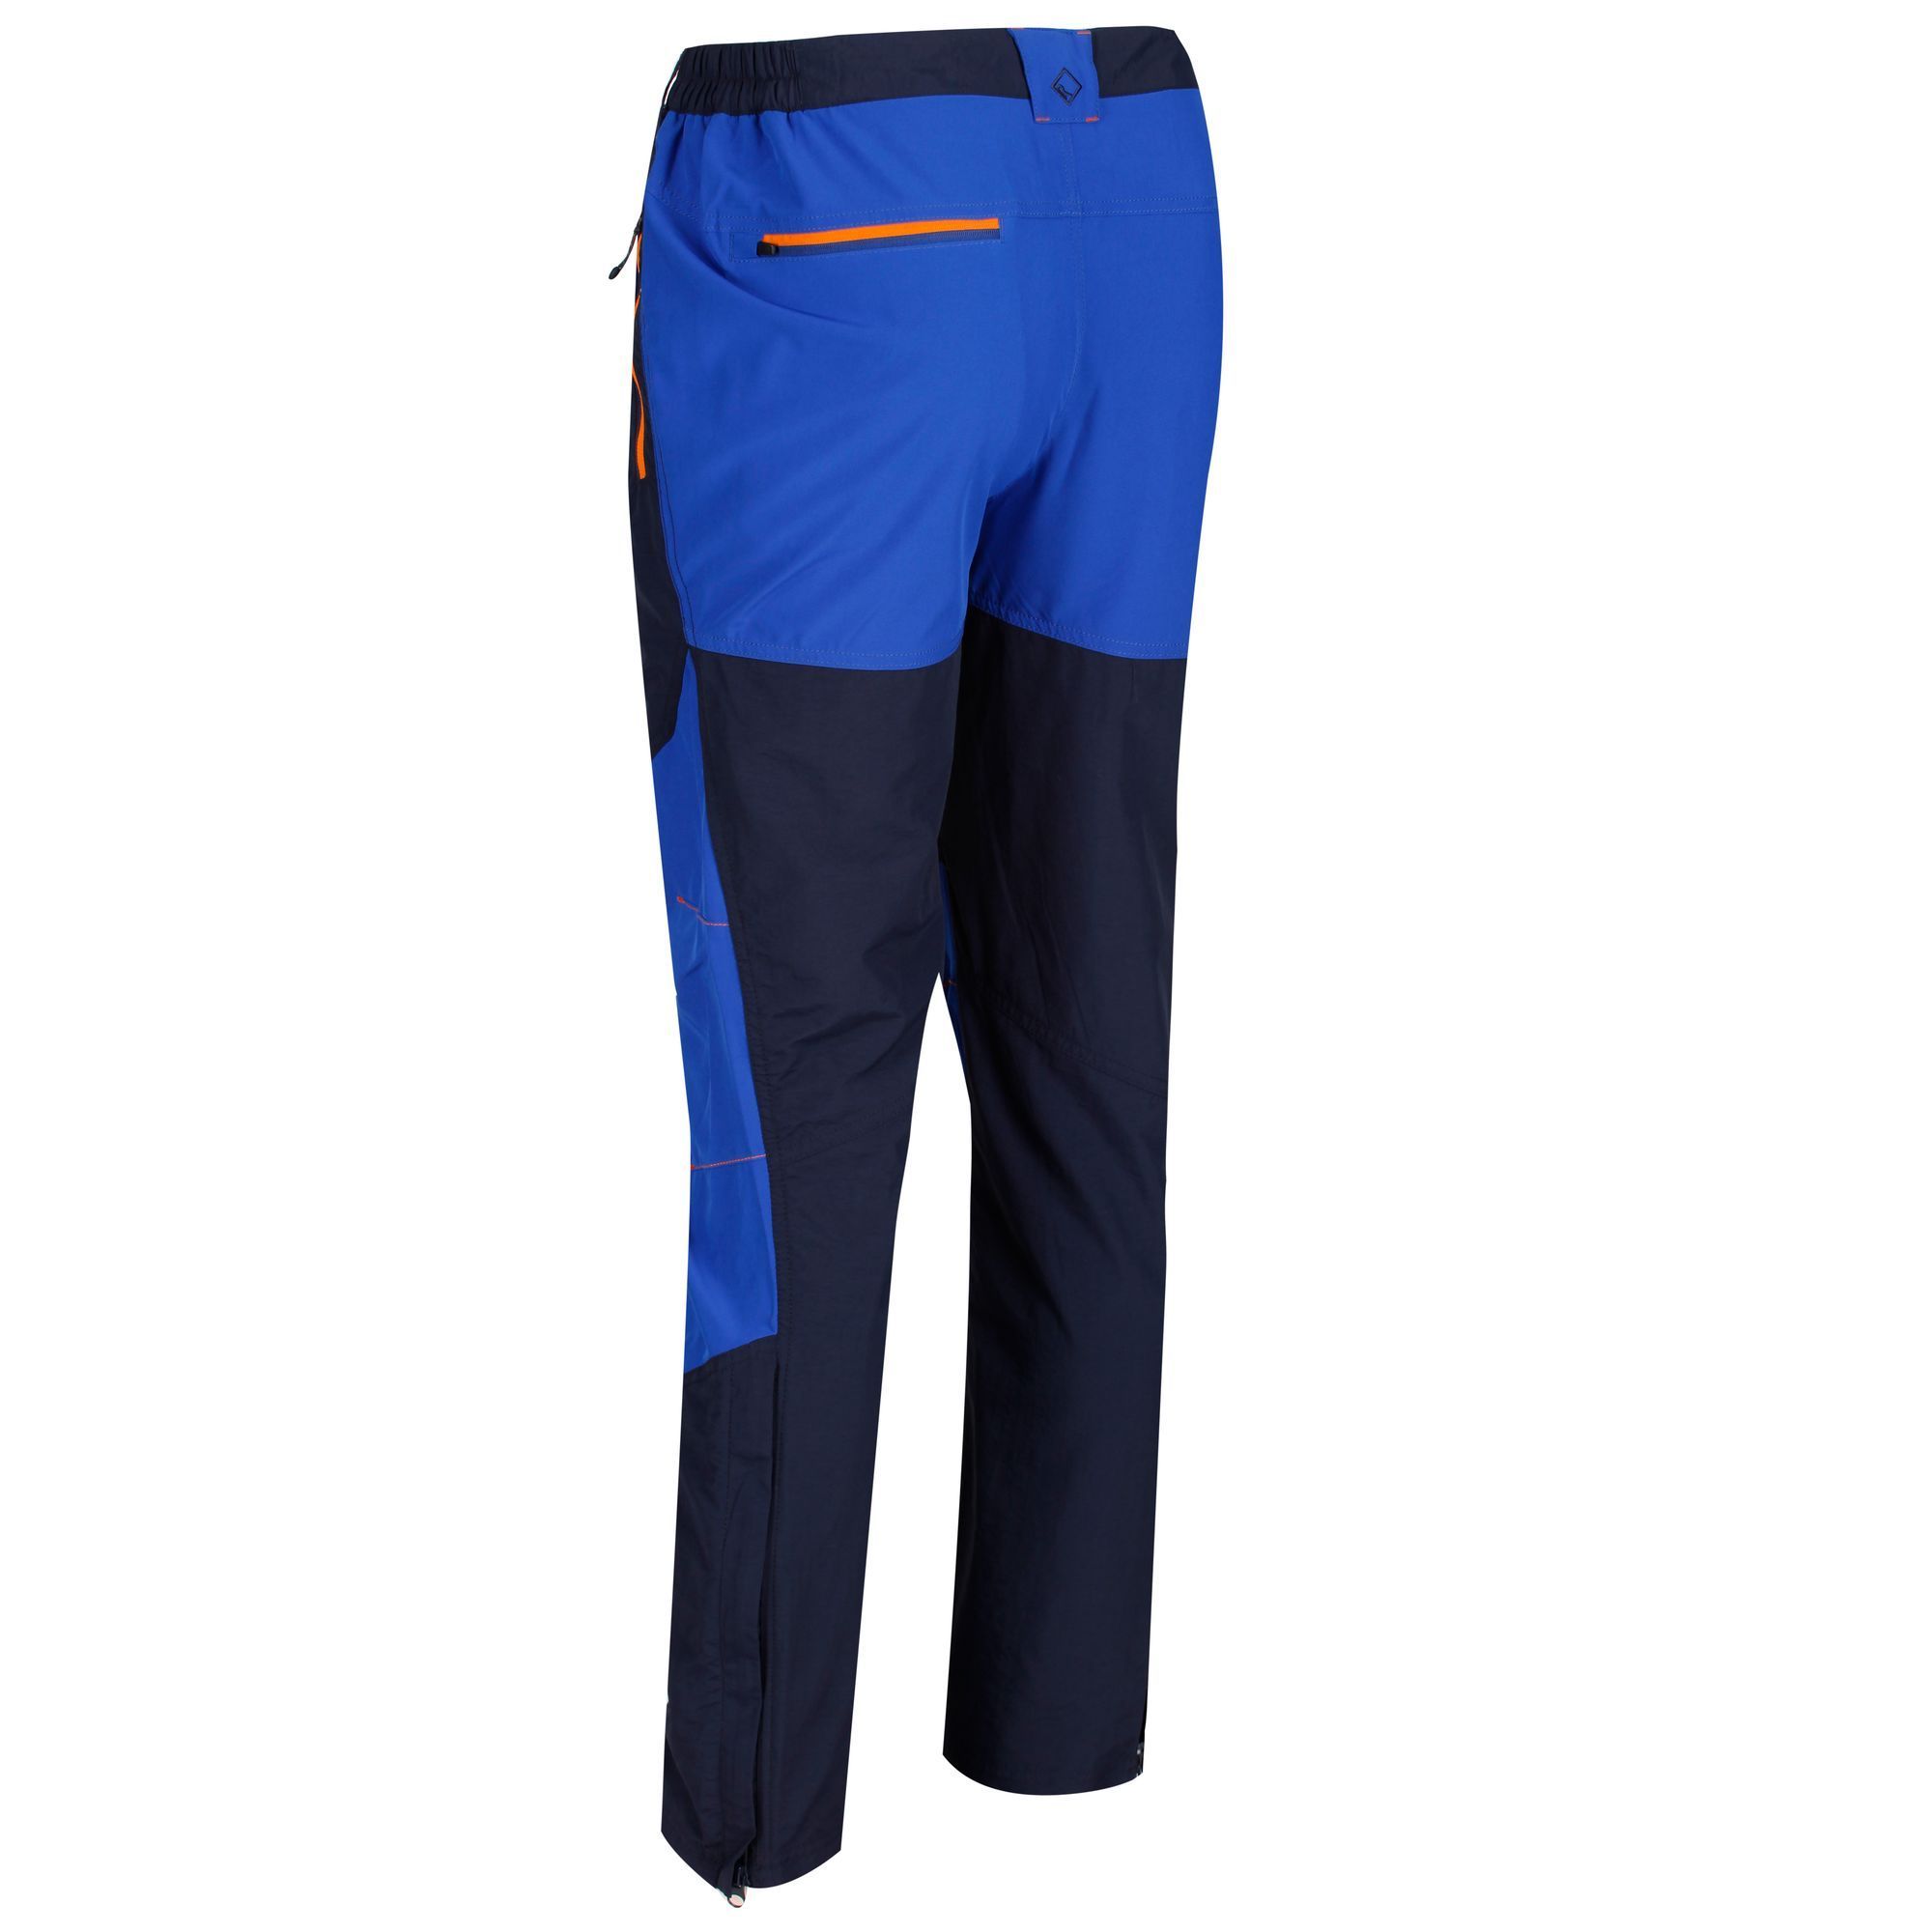 100% Polyamide. Mens showerproof hiking trousers with 40+ UPF sun protection and strategic stretch panelling. Lightweight yet hard-wearing polyamide fabric with stretch panels on the knees and seat for plenty of flex on the trail. With a part-elasticated waist, interactive belt loops and multiple zipped pockets to keep your adventure essentials organised. With the Regatta print on the left leg. Regatta Mens sizing (waist approx): 26in/66cm, 28in/71cm, 30in/76cm, 32in/81cm, 33in/84cm, 34in/86.5cm, 36in/91.5cm, 38in/96.5cm, 40in/101.5cm, 42in/106.5cm, 44in/111.5cm, 46in/117cm, 48in/122cm, 50in/127cm. Regatta Trouser Leg length: Short- 29in, Regular- 31in, Long- 33in.